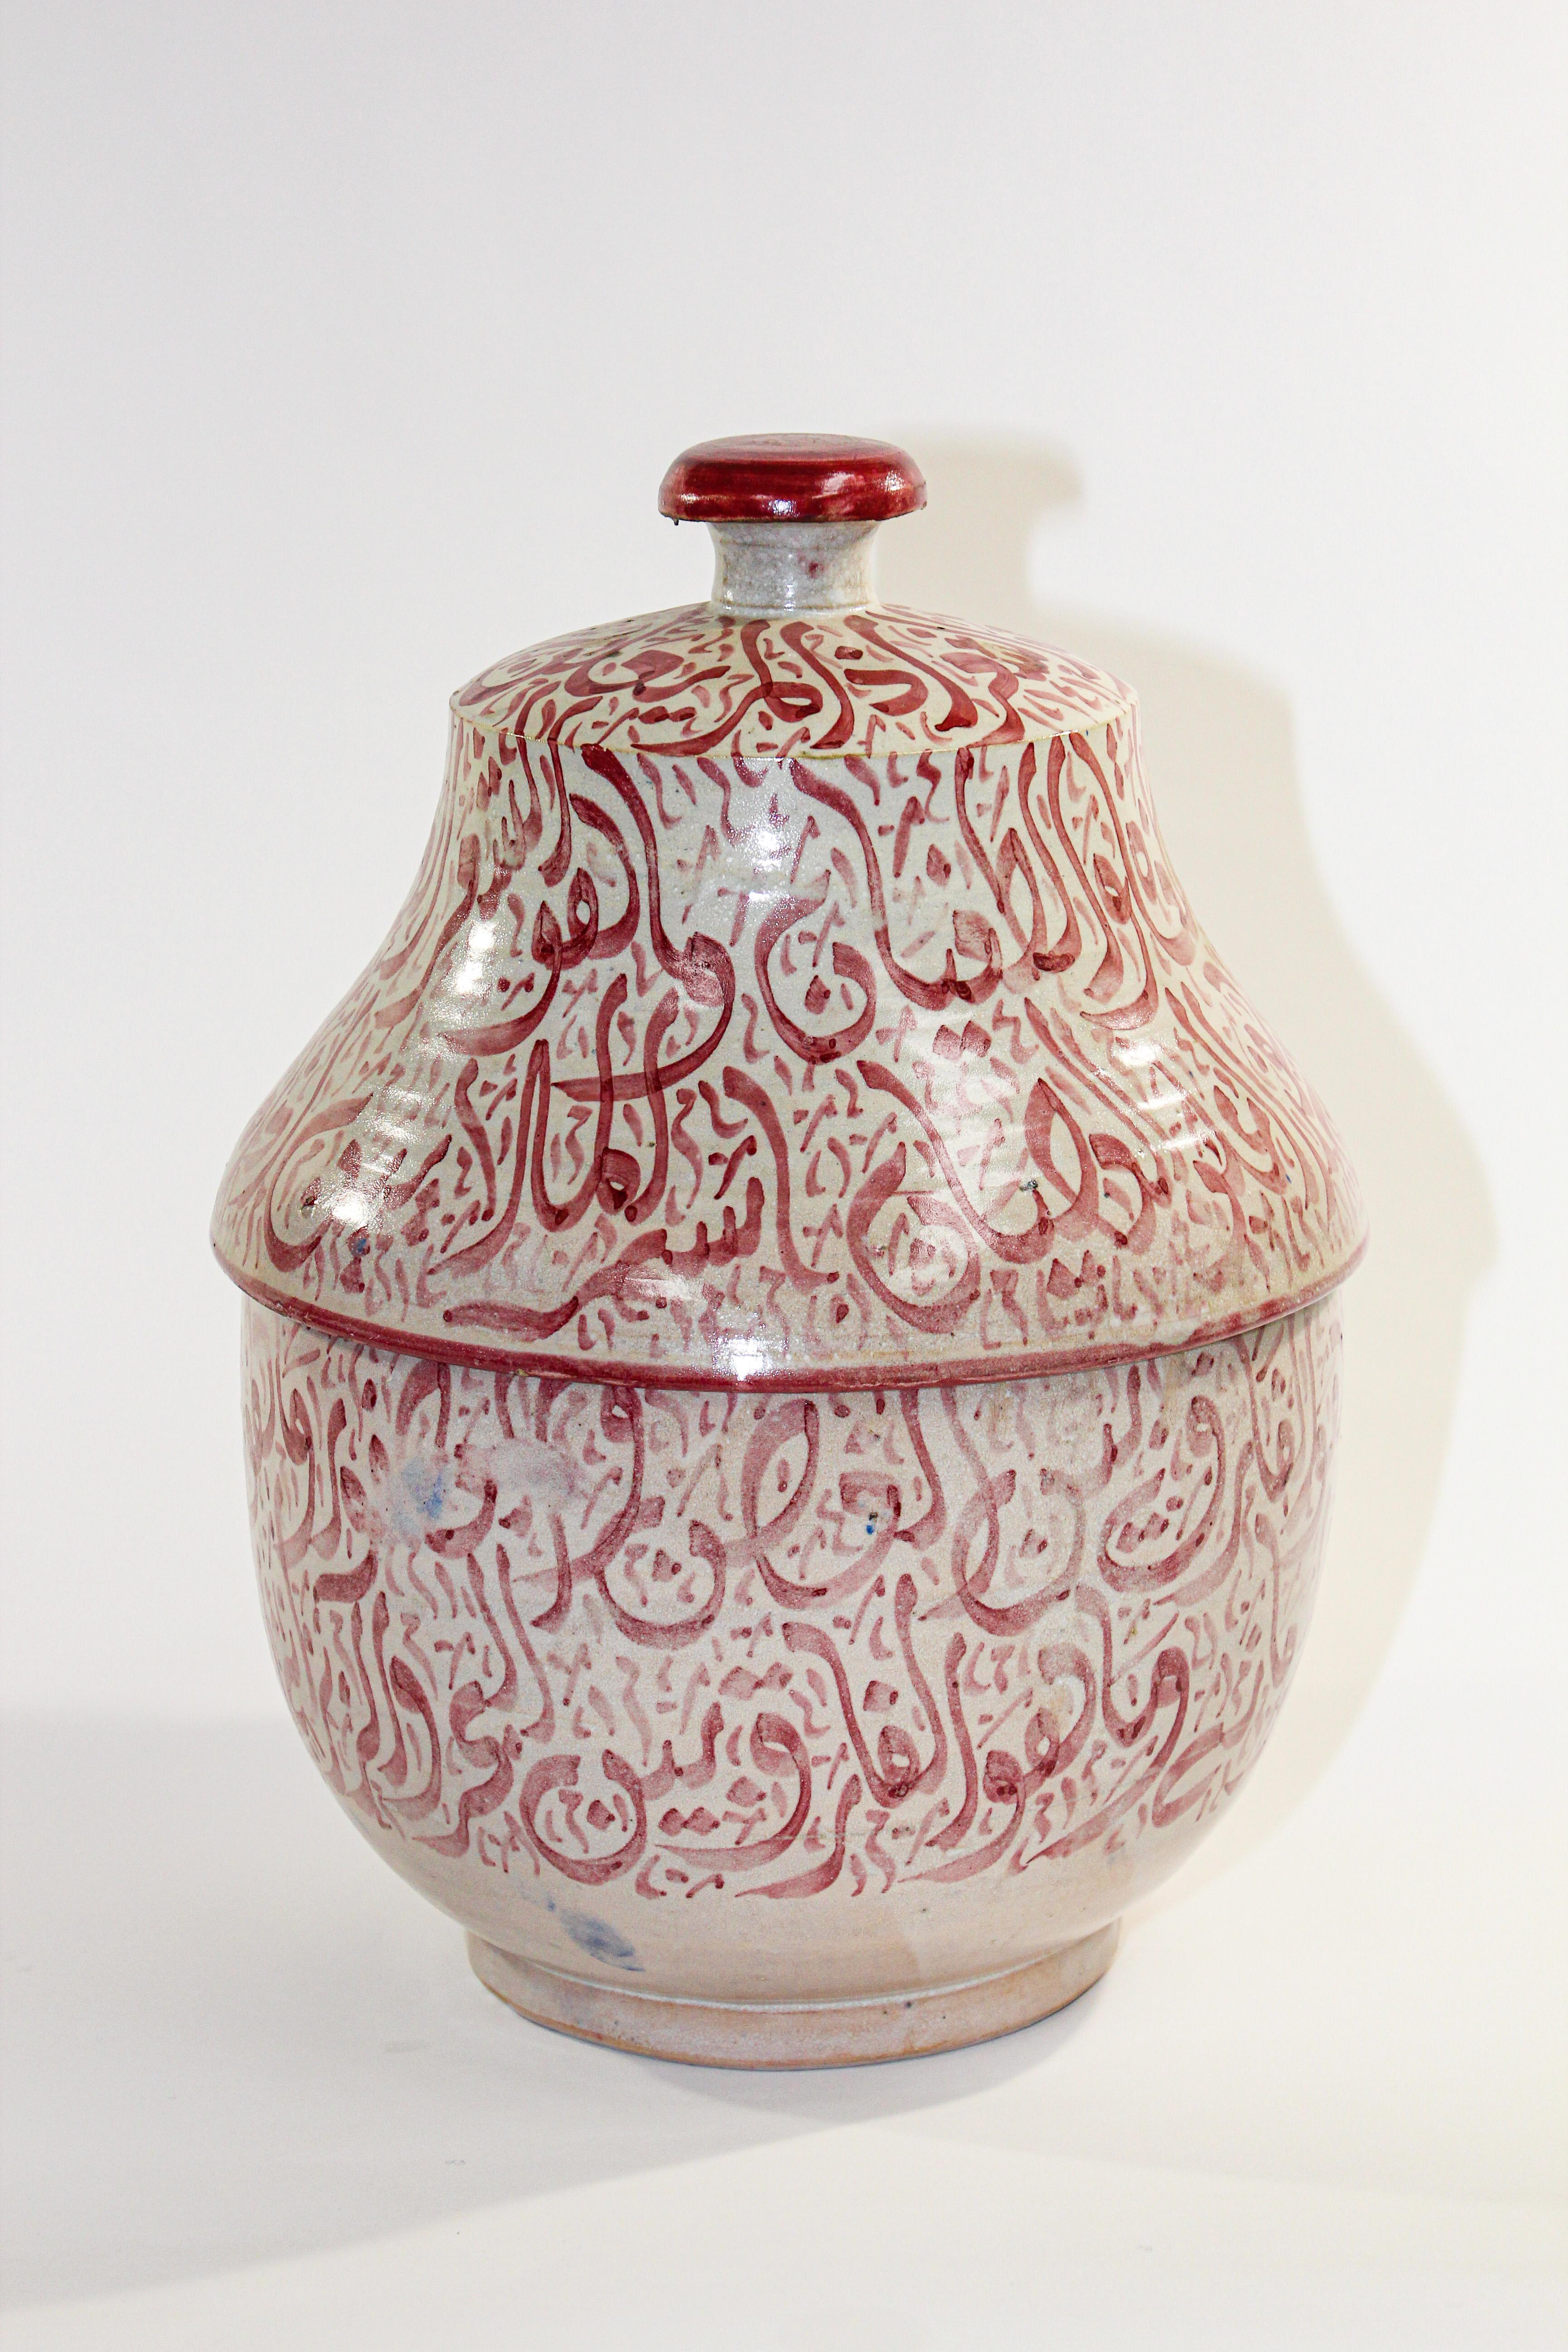 Moroccan glazed ceramic urn with lid from Fez. 
Moorish style ceramic handcrafted and hand-painted with Arabic calligraphy pink writing.
This kind of Art Writing looks calligraphic is called Lettrism, it is a form of art that uses letters that are